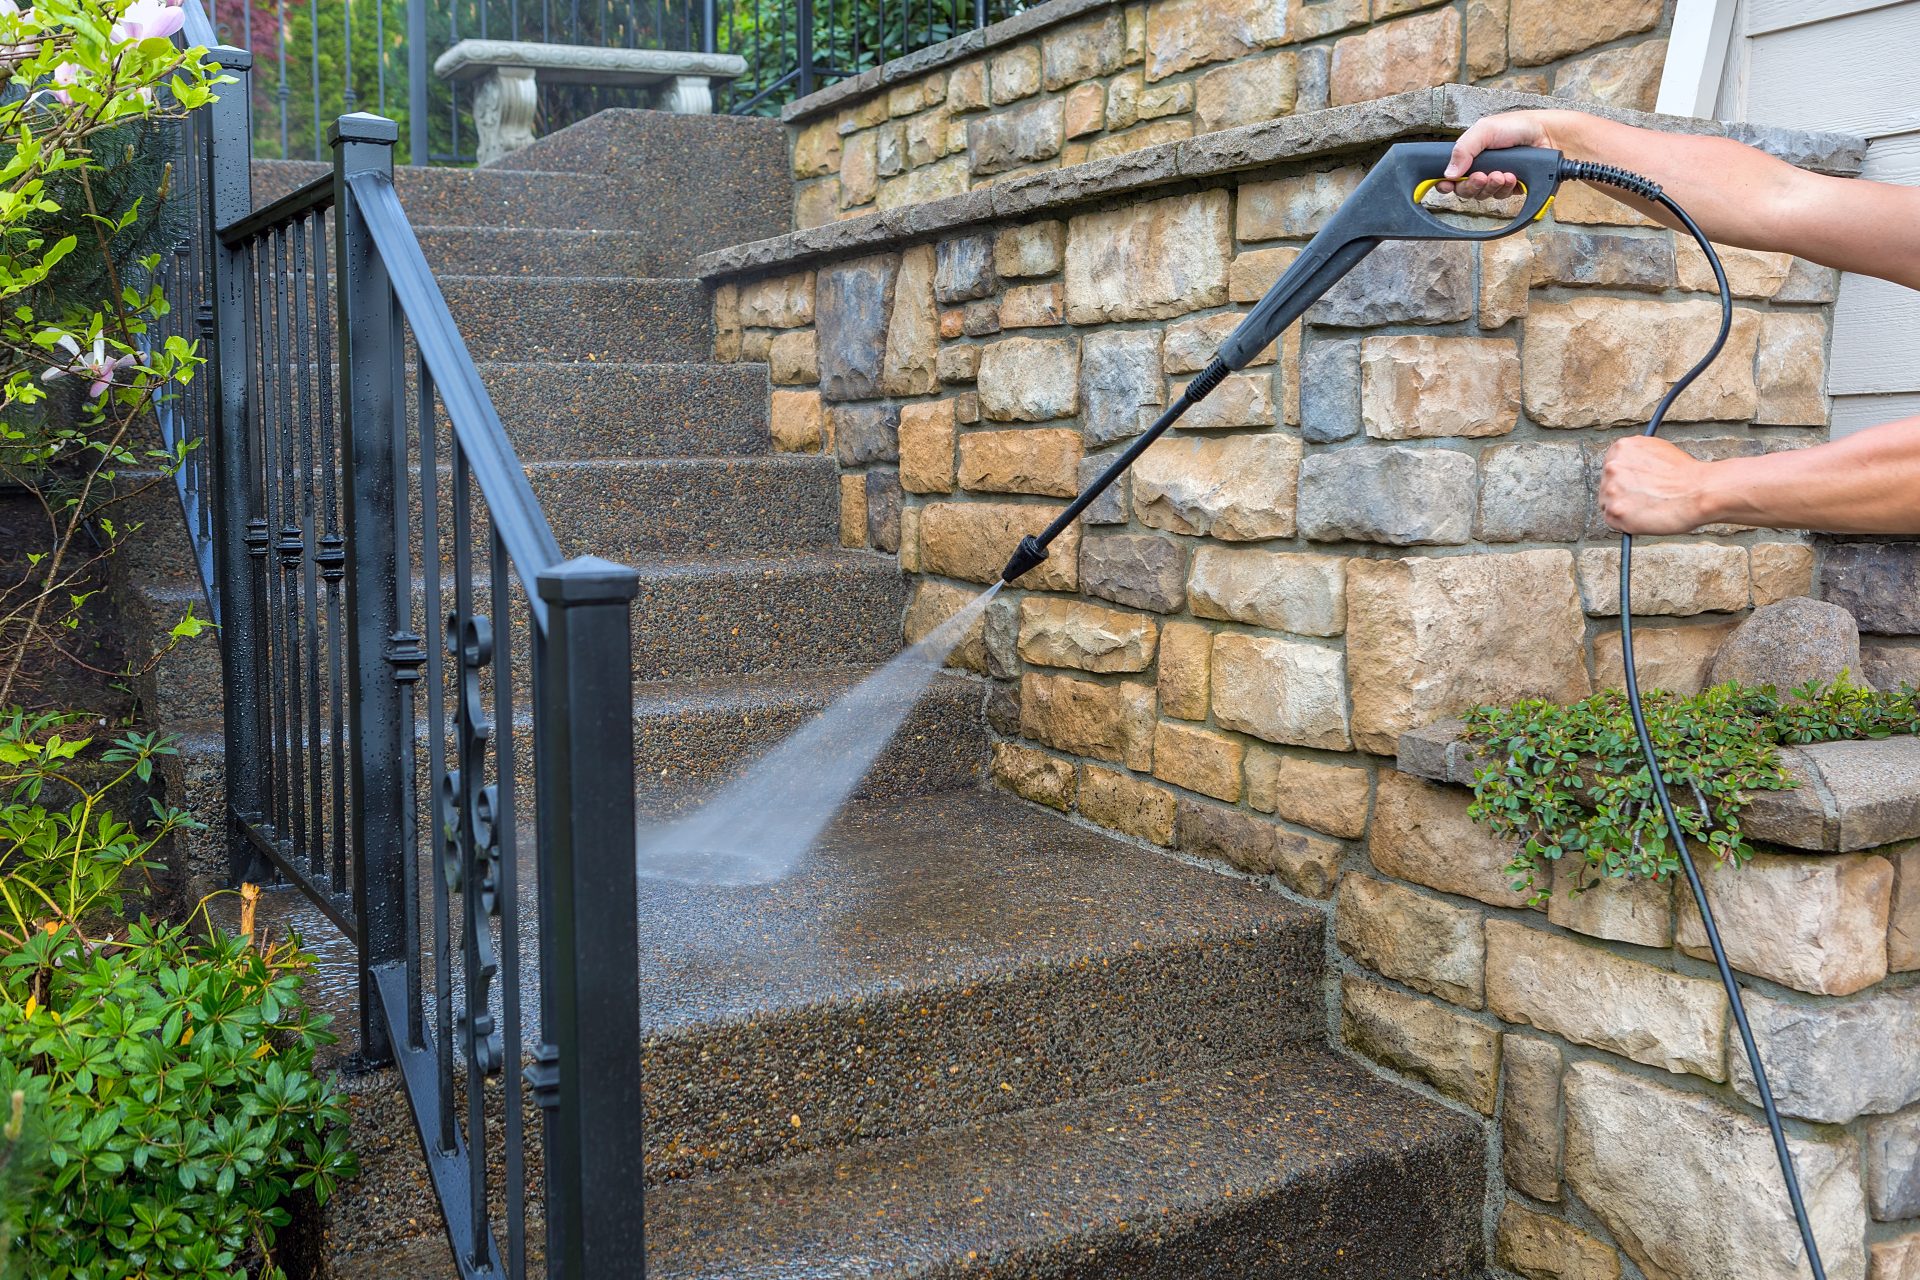 How Long Does a Professional Pressure Washing Service Take?